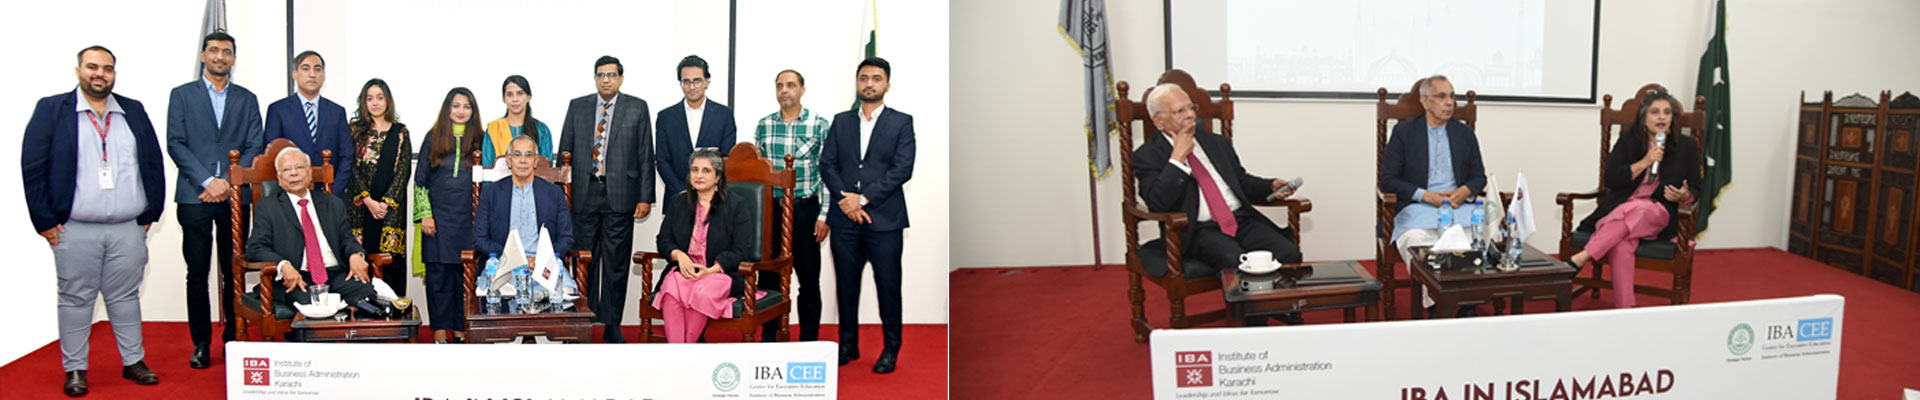 CEE at IBA in Islamabad Hosted a Fireside Chat on Postgraduate Diploma Programs